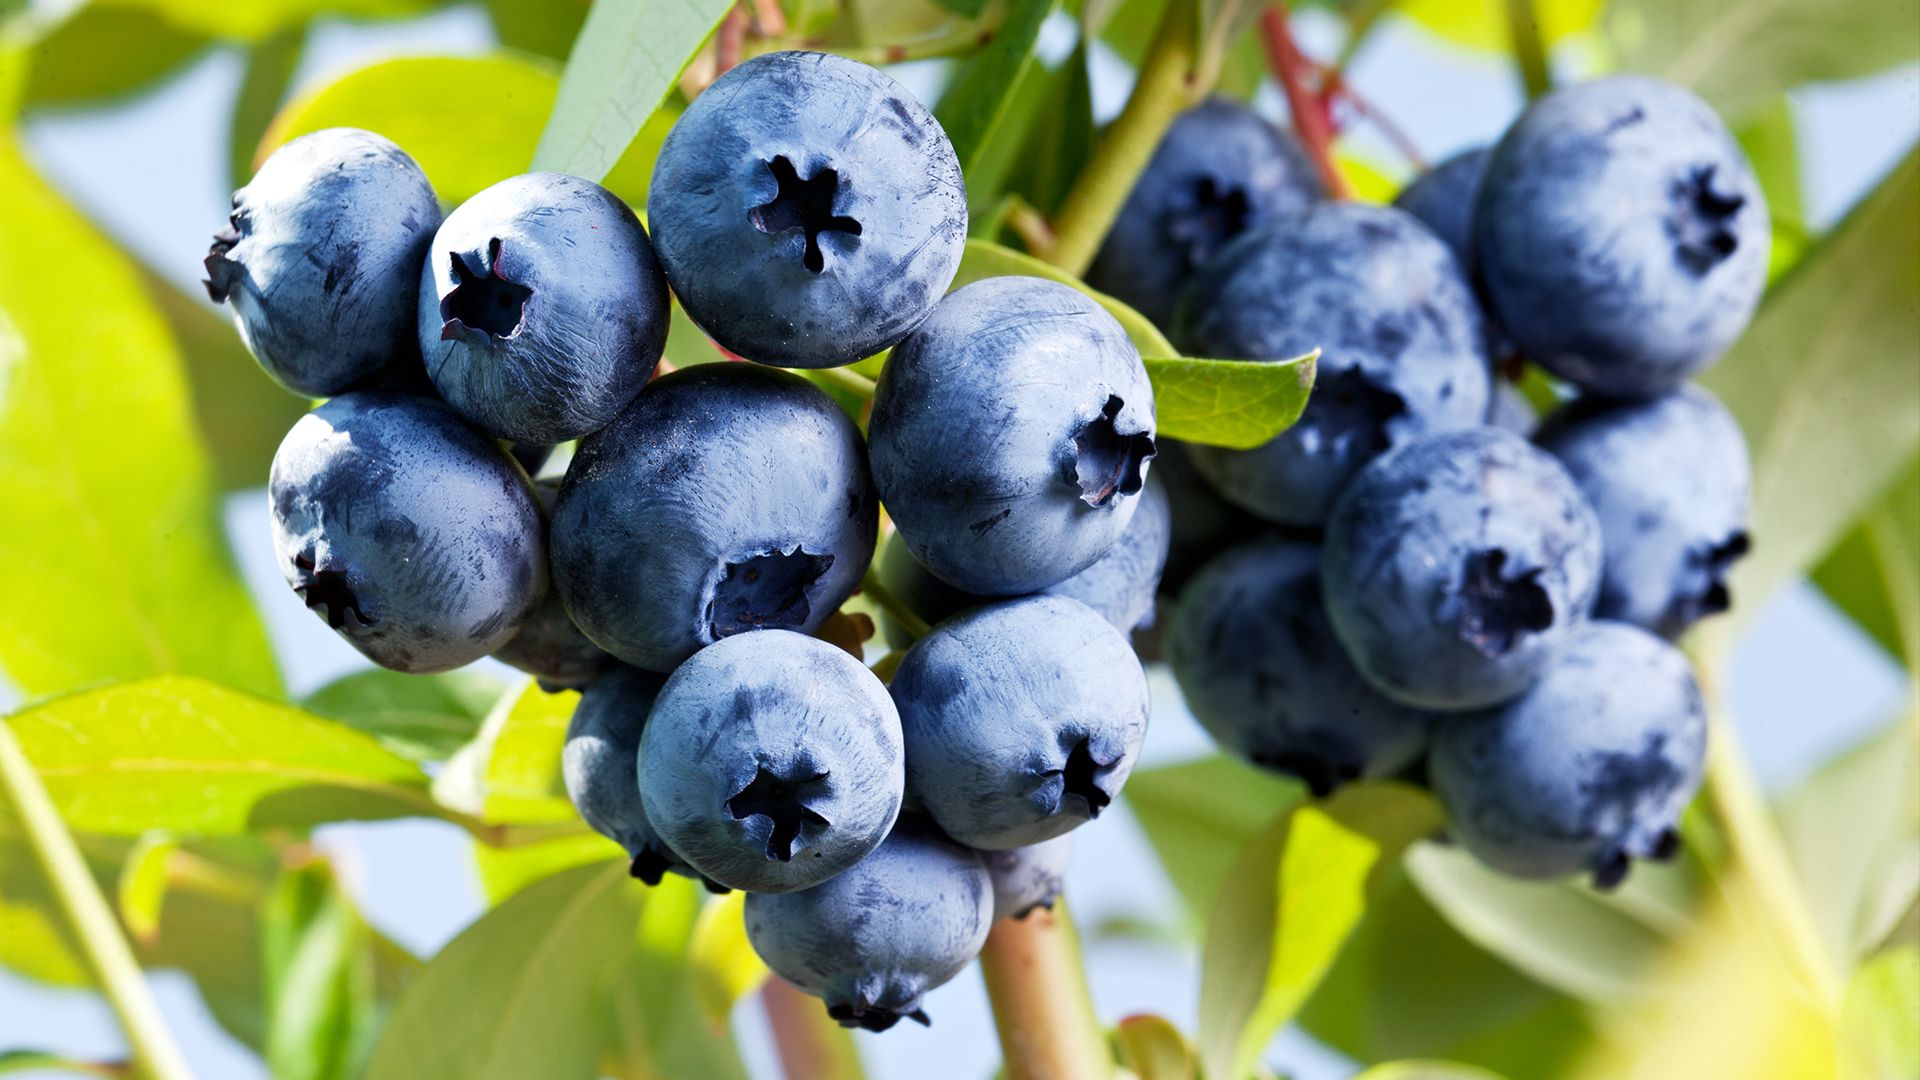 why are blueberries blue?